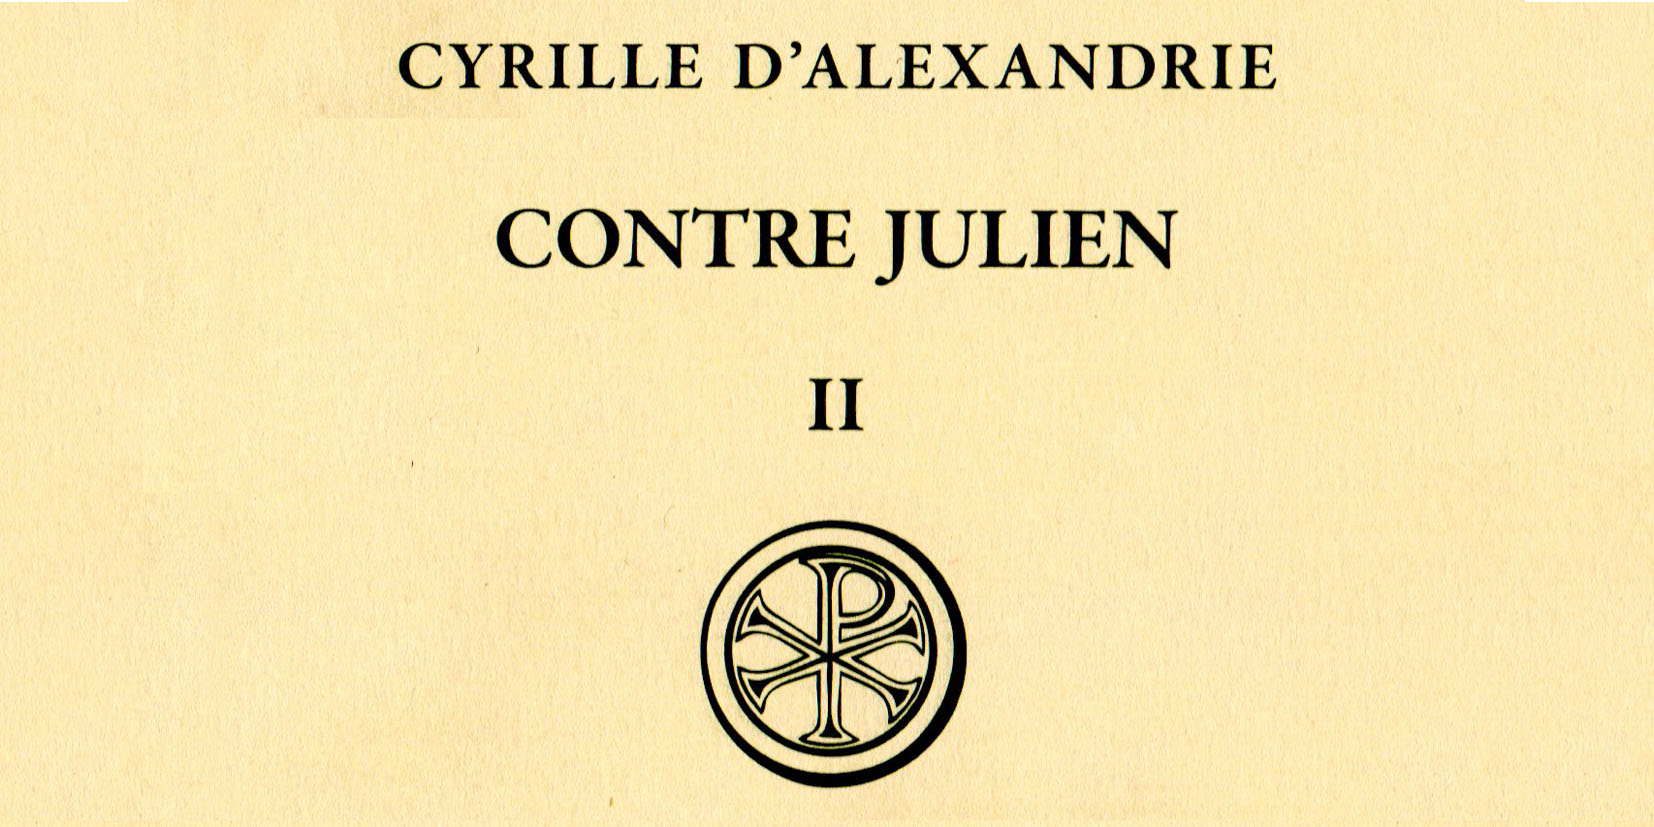 Recension: Cyrille d’Alexandrie, « Contre Julien », tome Il, livres III-V